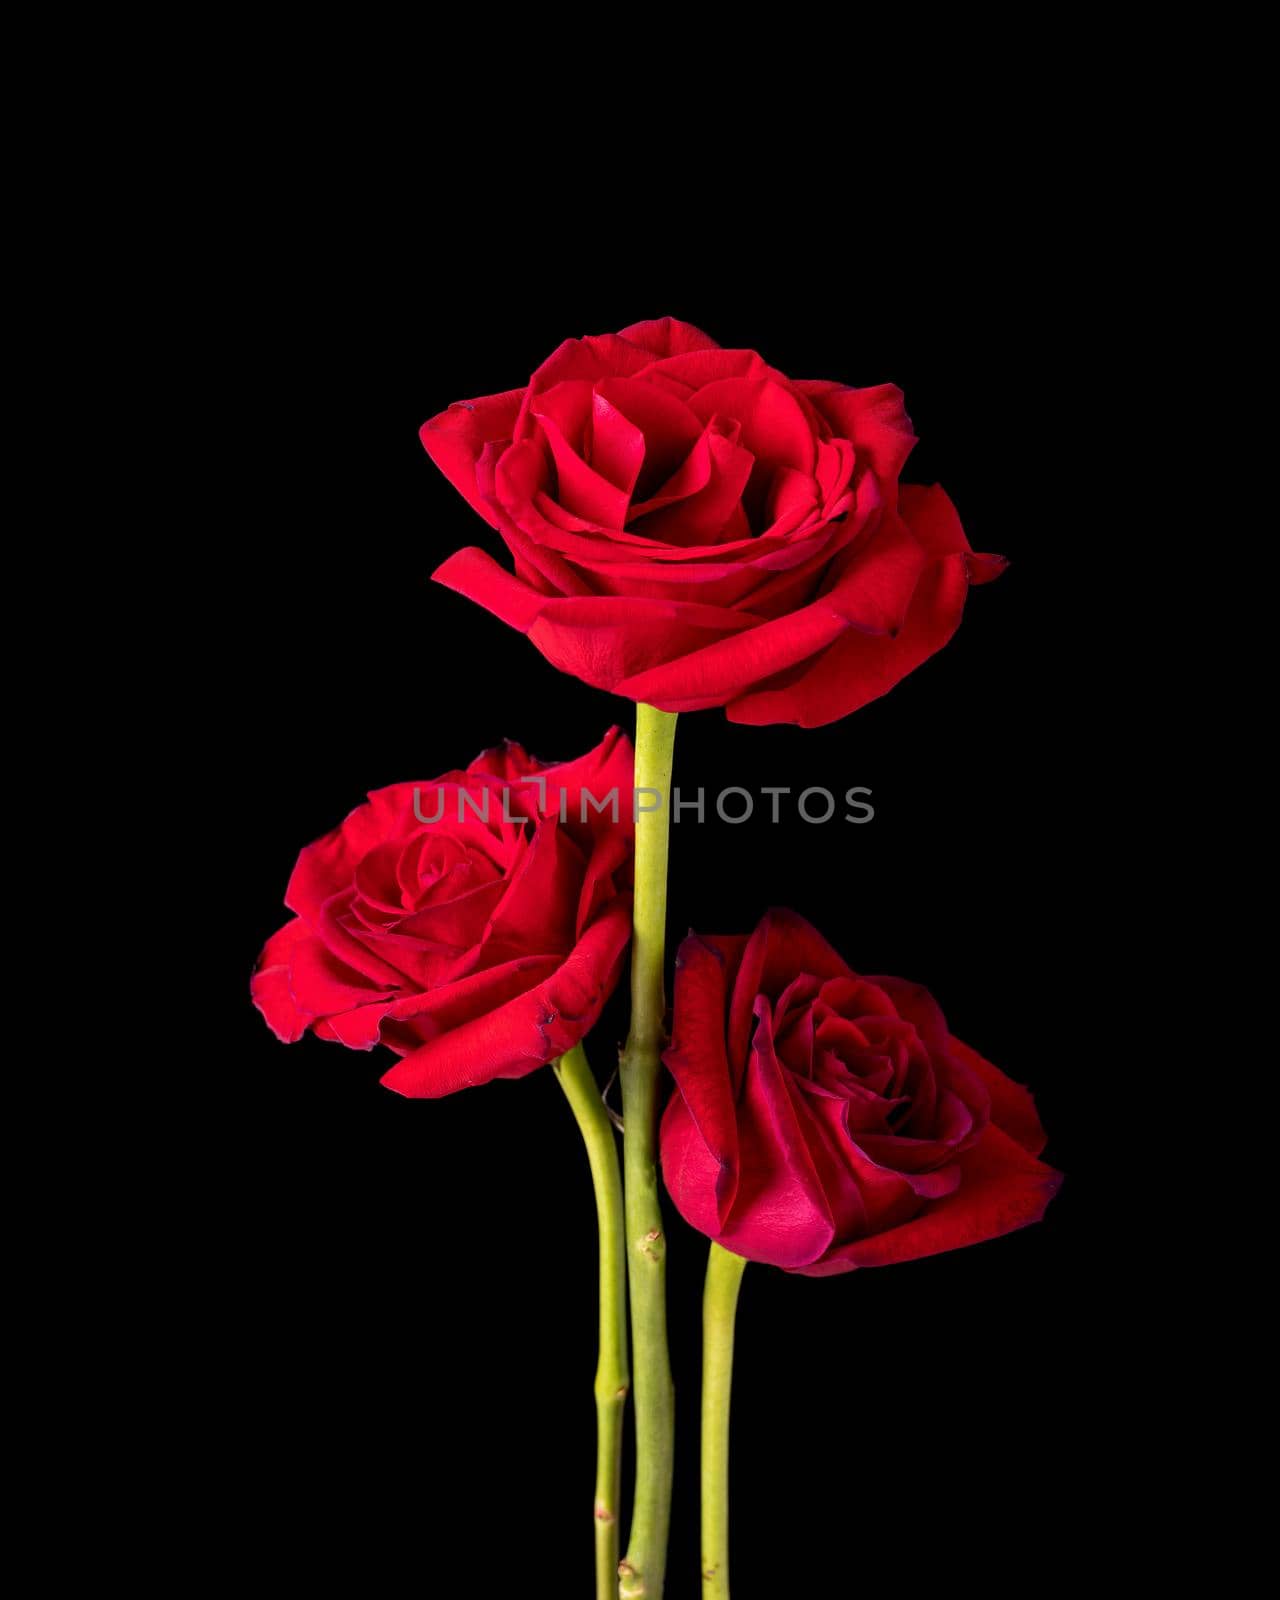 Trio of American Beauty Roses on Black by CharlieFloyd